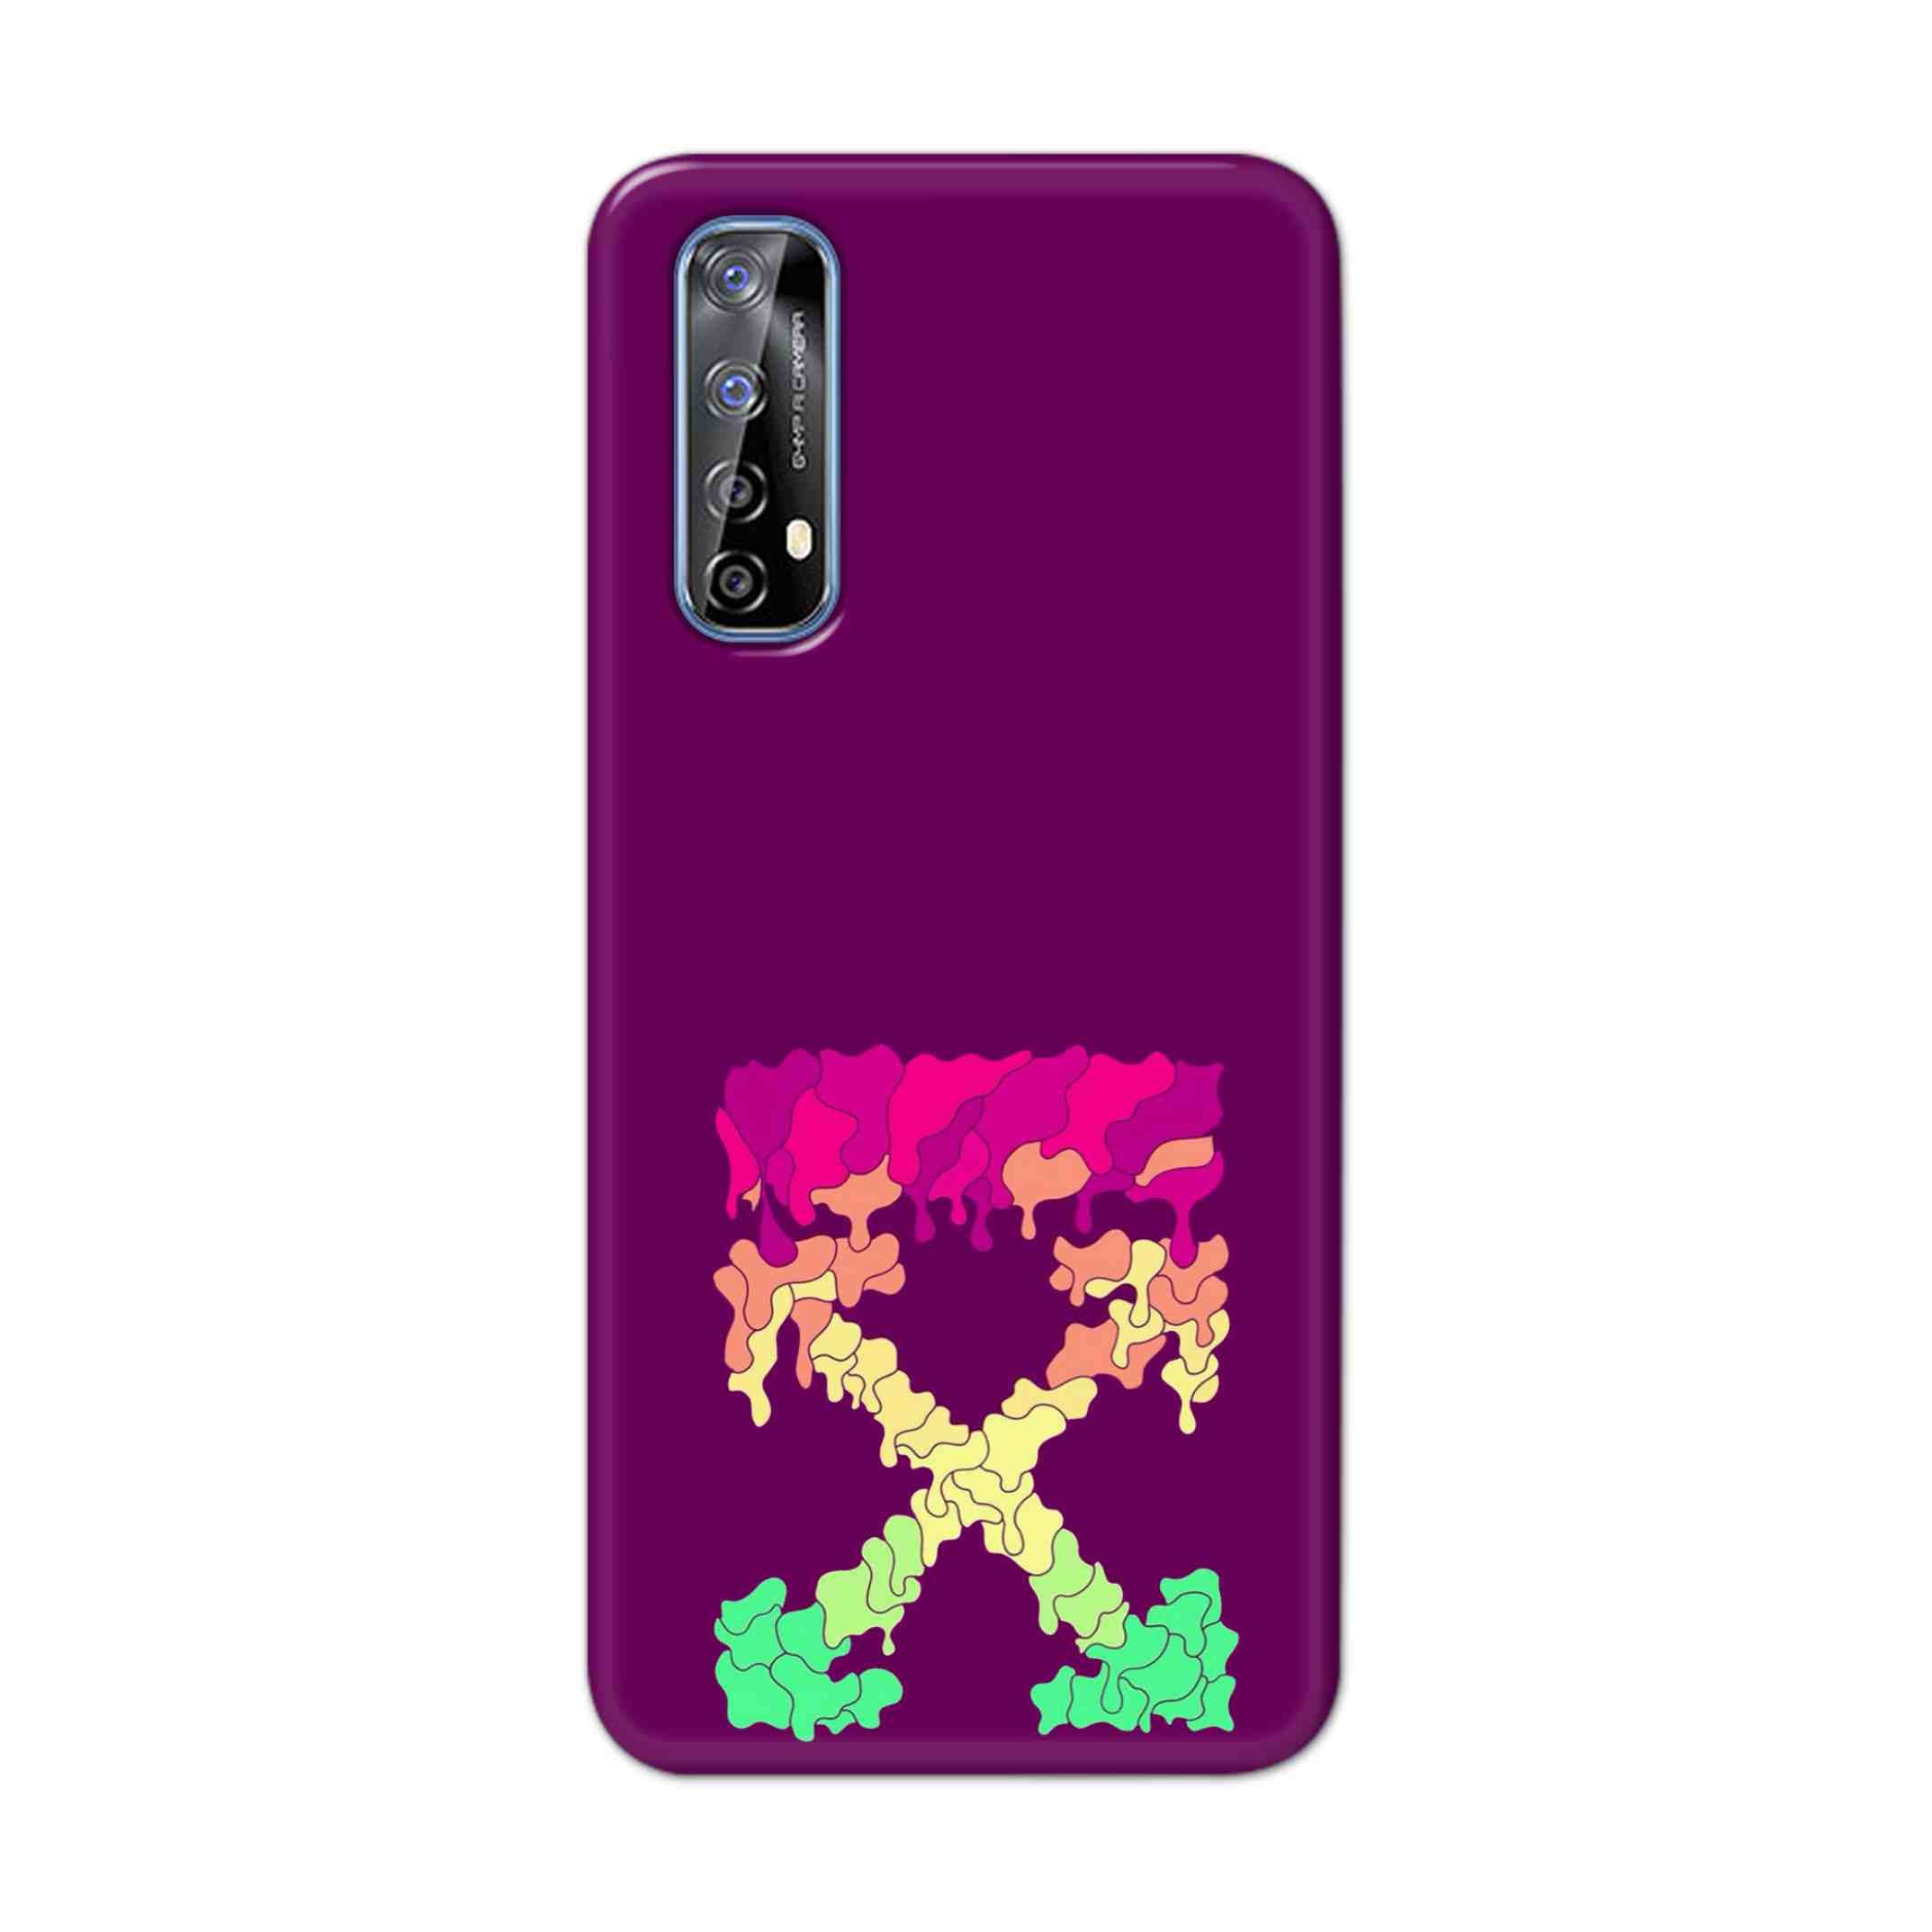 Buy X.O Hard Back Mobile Phone Case Cover For Realme 7 Online